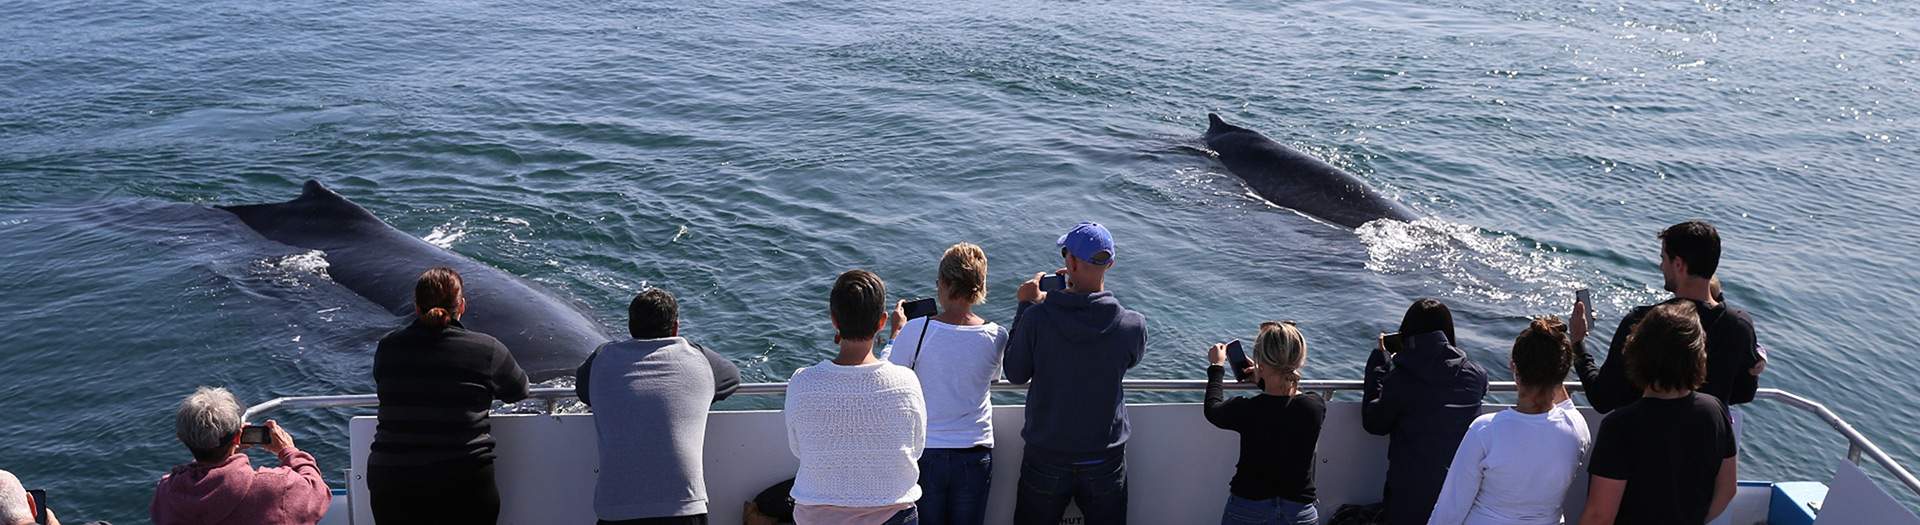 Whale watching off Digby Neck